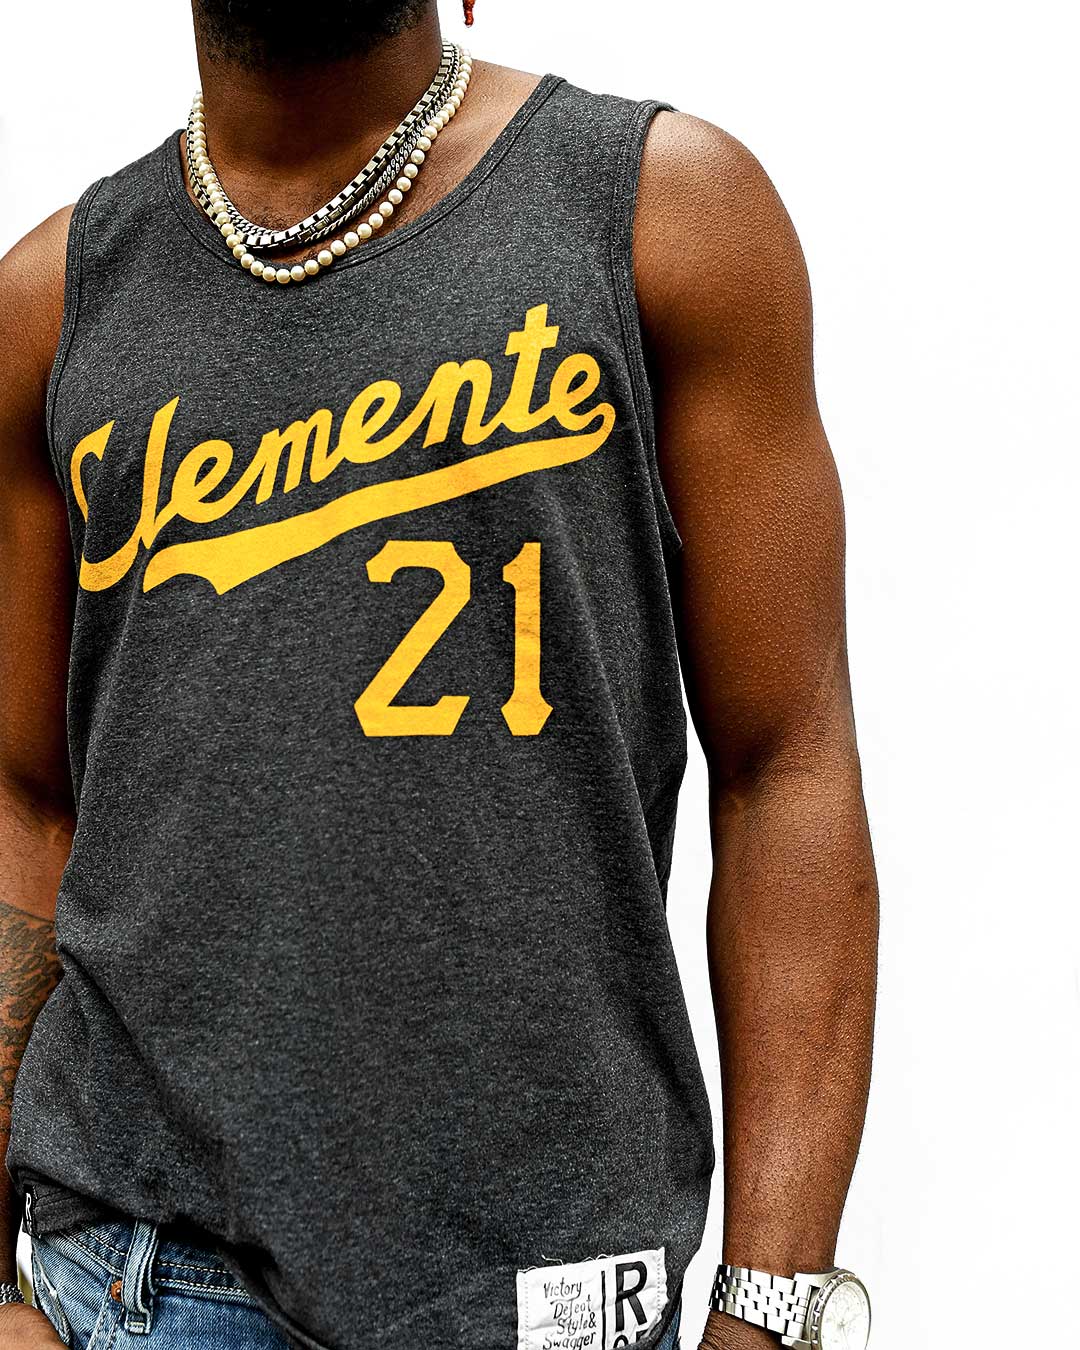 Clemente #21 Black Tank - Roots of Fight